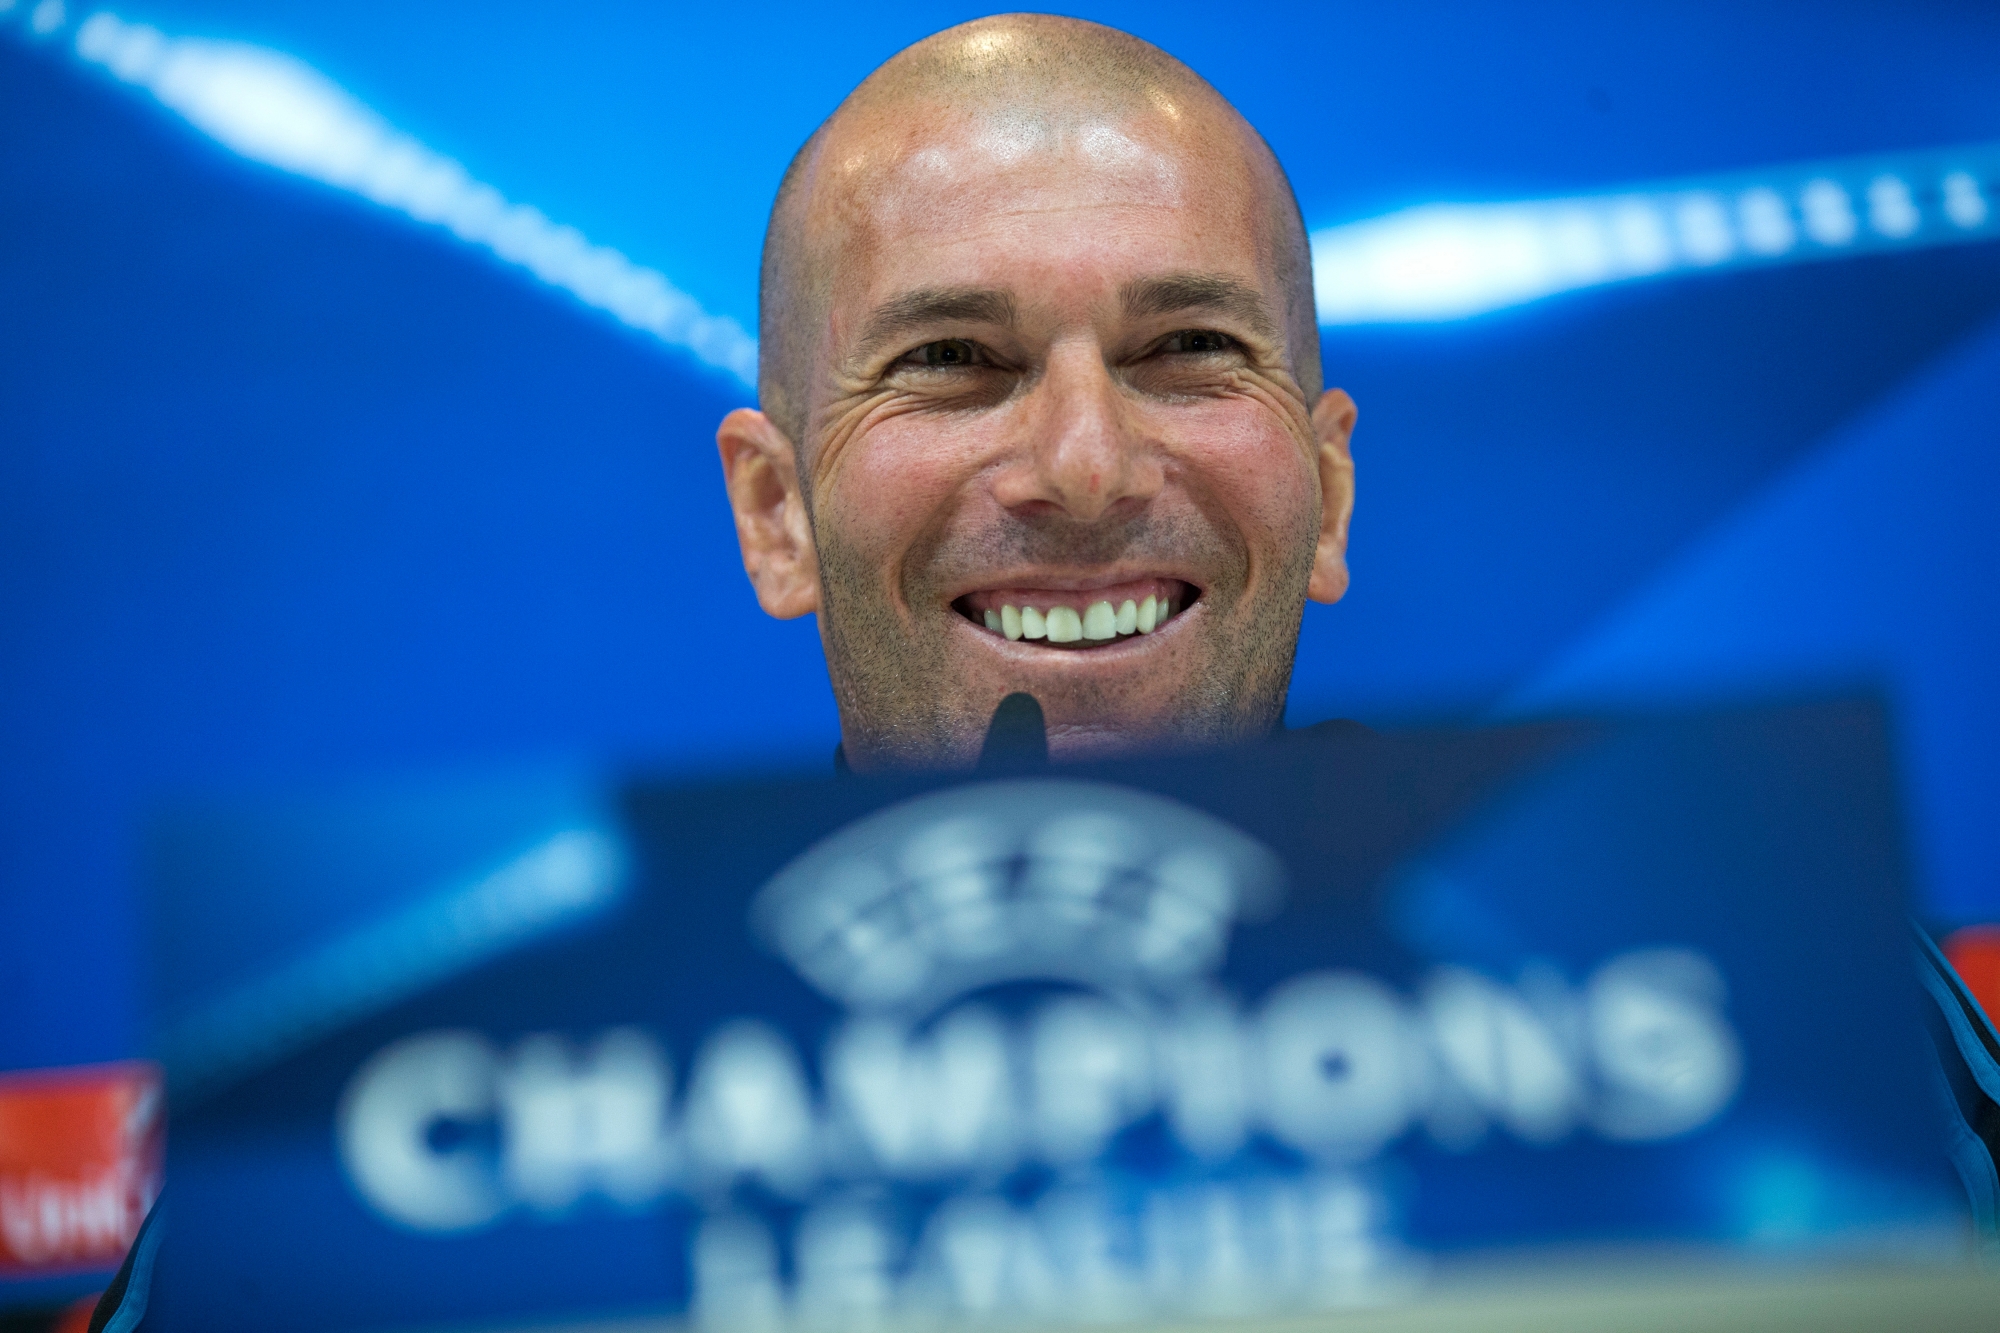 Real Madrid head coach Zinedine Zidane talks to journalists during a news conference at the team's Valdebebas training ground in Madrid, Monday, April 30, 2018. Real Madrid will play a Champions League semi final second leg soccer match with Bayern Munich on Tuesday, May 1. (AP Photo/Francisco Seco) Spain Soccer Champions League